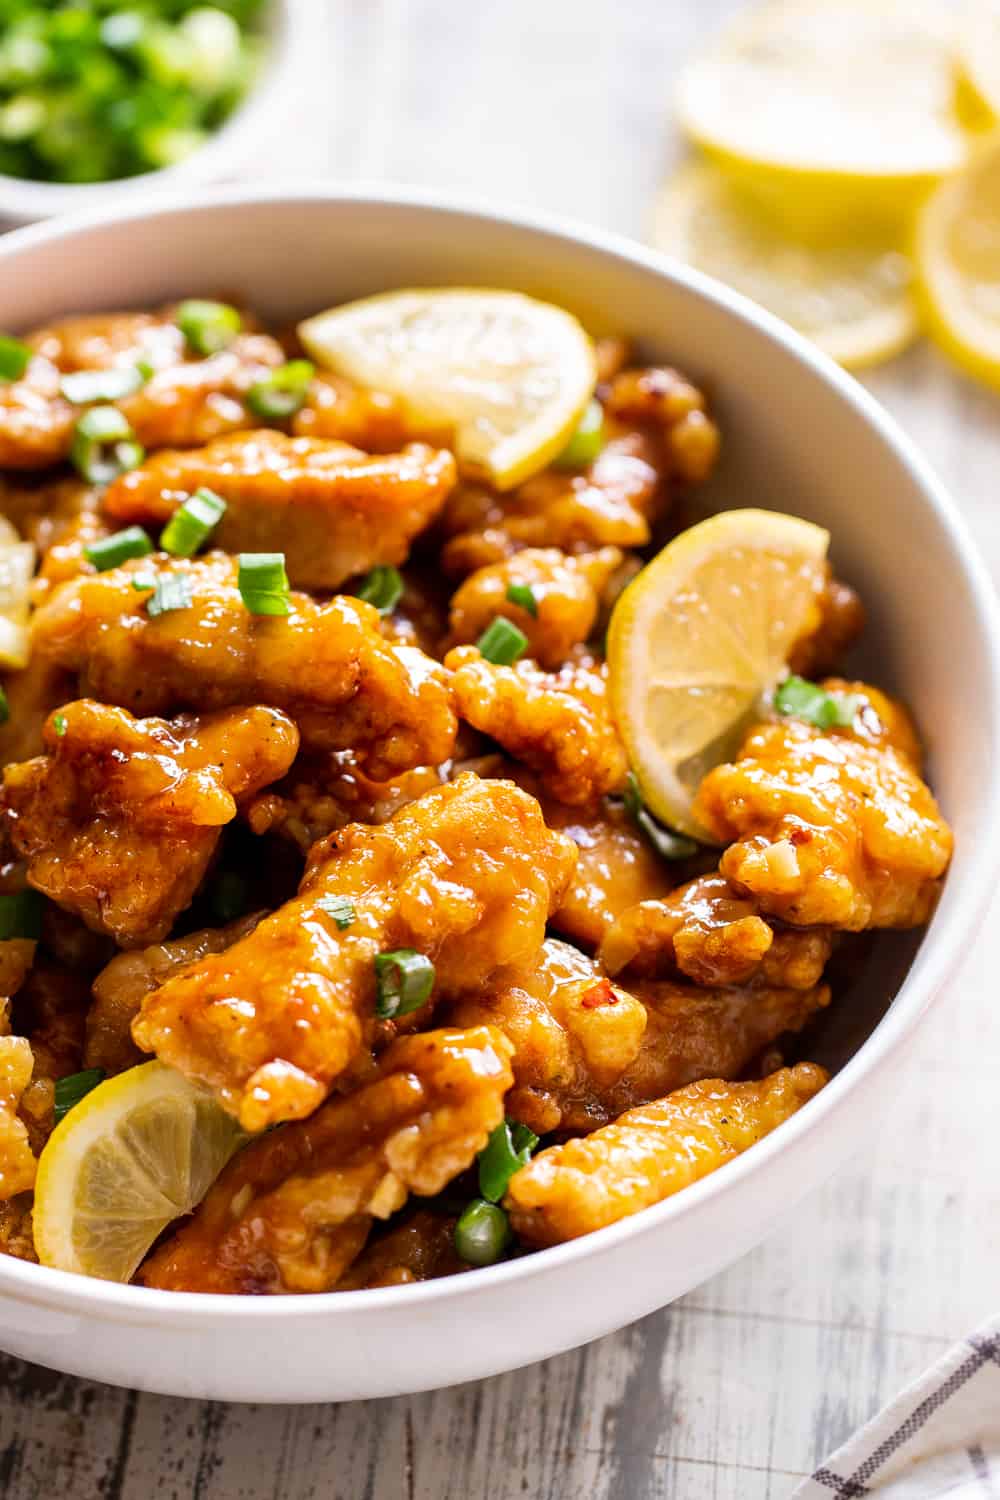 This flavor packed Paleo Chinese Lemon Chicken is a healthier homemade version of a takeout favorite! It’s easy to make and contains no refined sugar, family approved and seriously tasty with a Whole30 option.  Keep it Paleo and Whole30 by serving over sautéed cauliflower rice or with your favorite stir fried veggies. #paleo #paleorecipes #cleaneating 